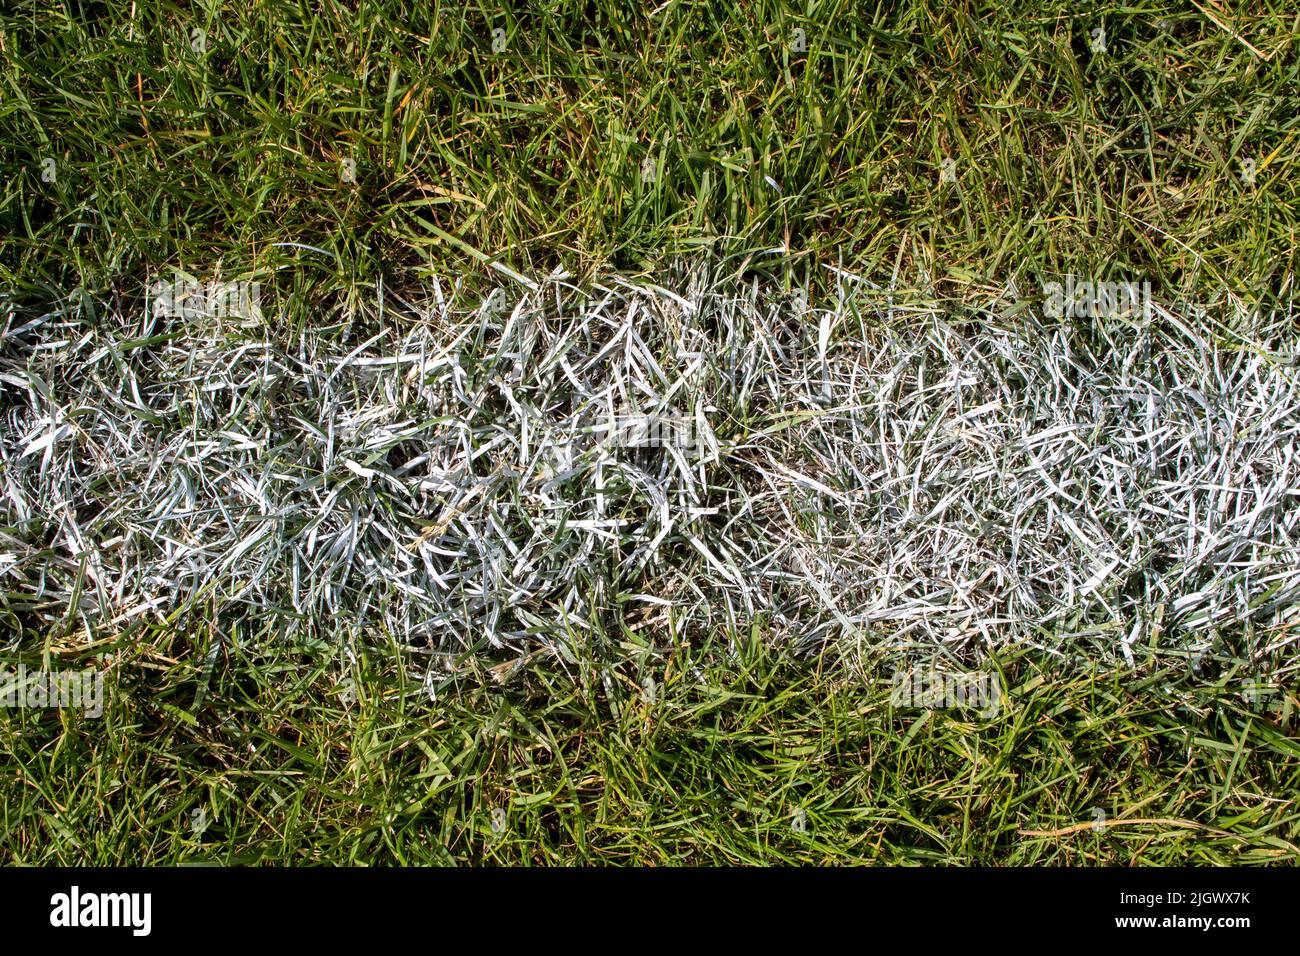 grass sports field close up with chalked white line Stock Photo